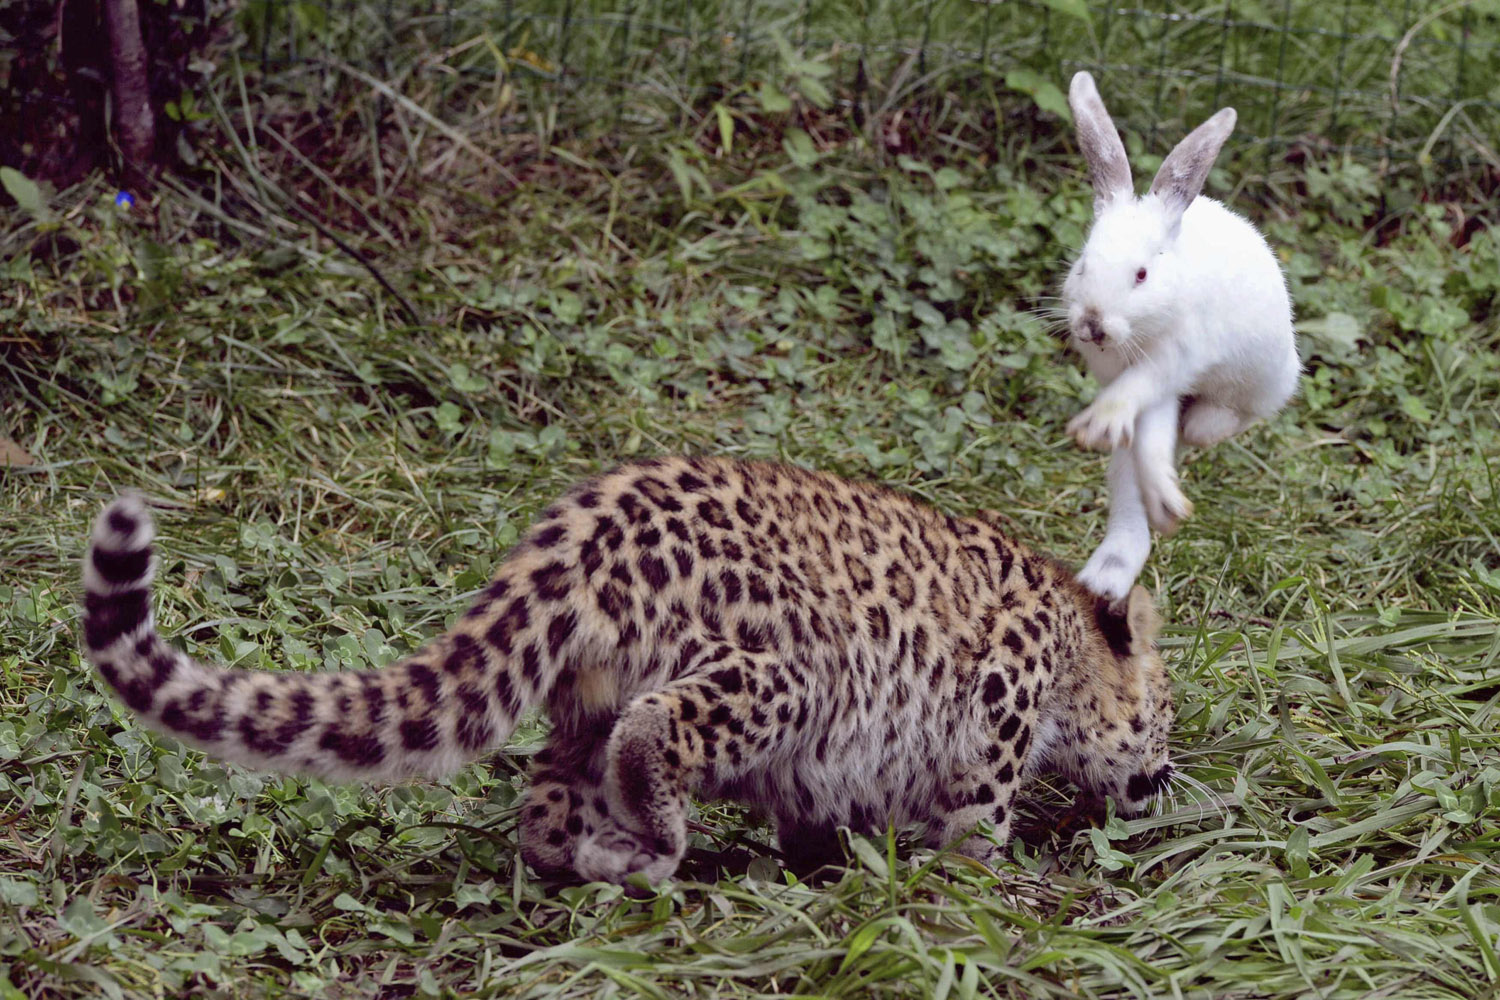 A rabbit hops to avoid a five-month-old leopard cub during a test of cubs' wild natural instincts at a wildlife park in Qingdao